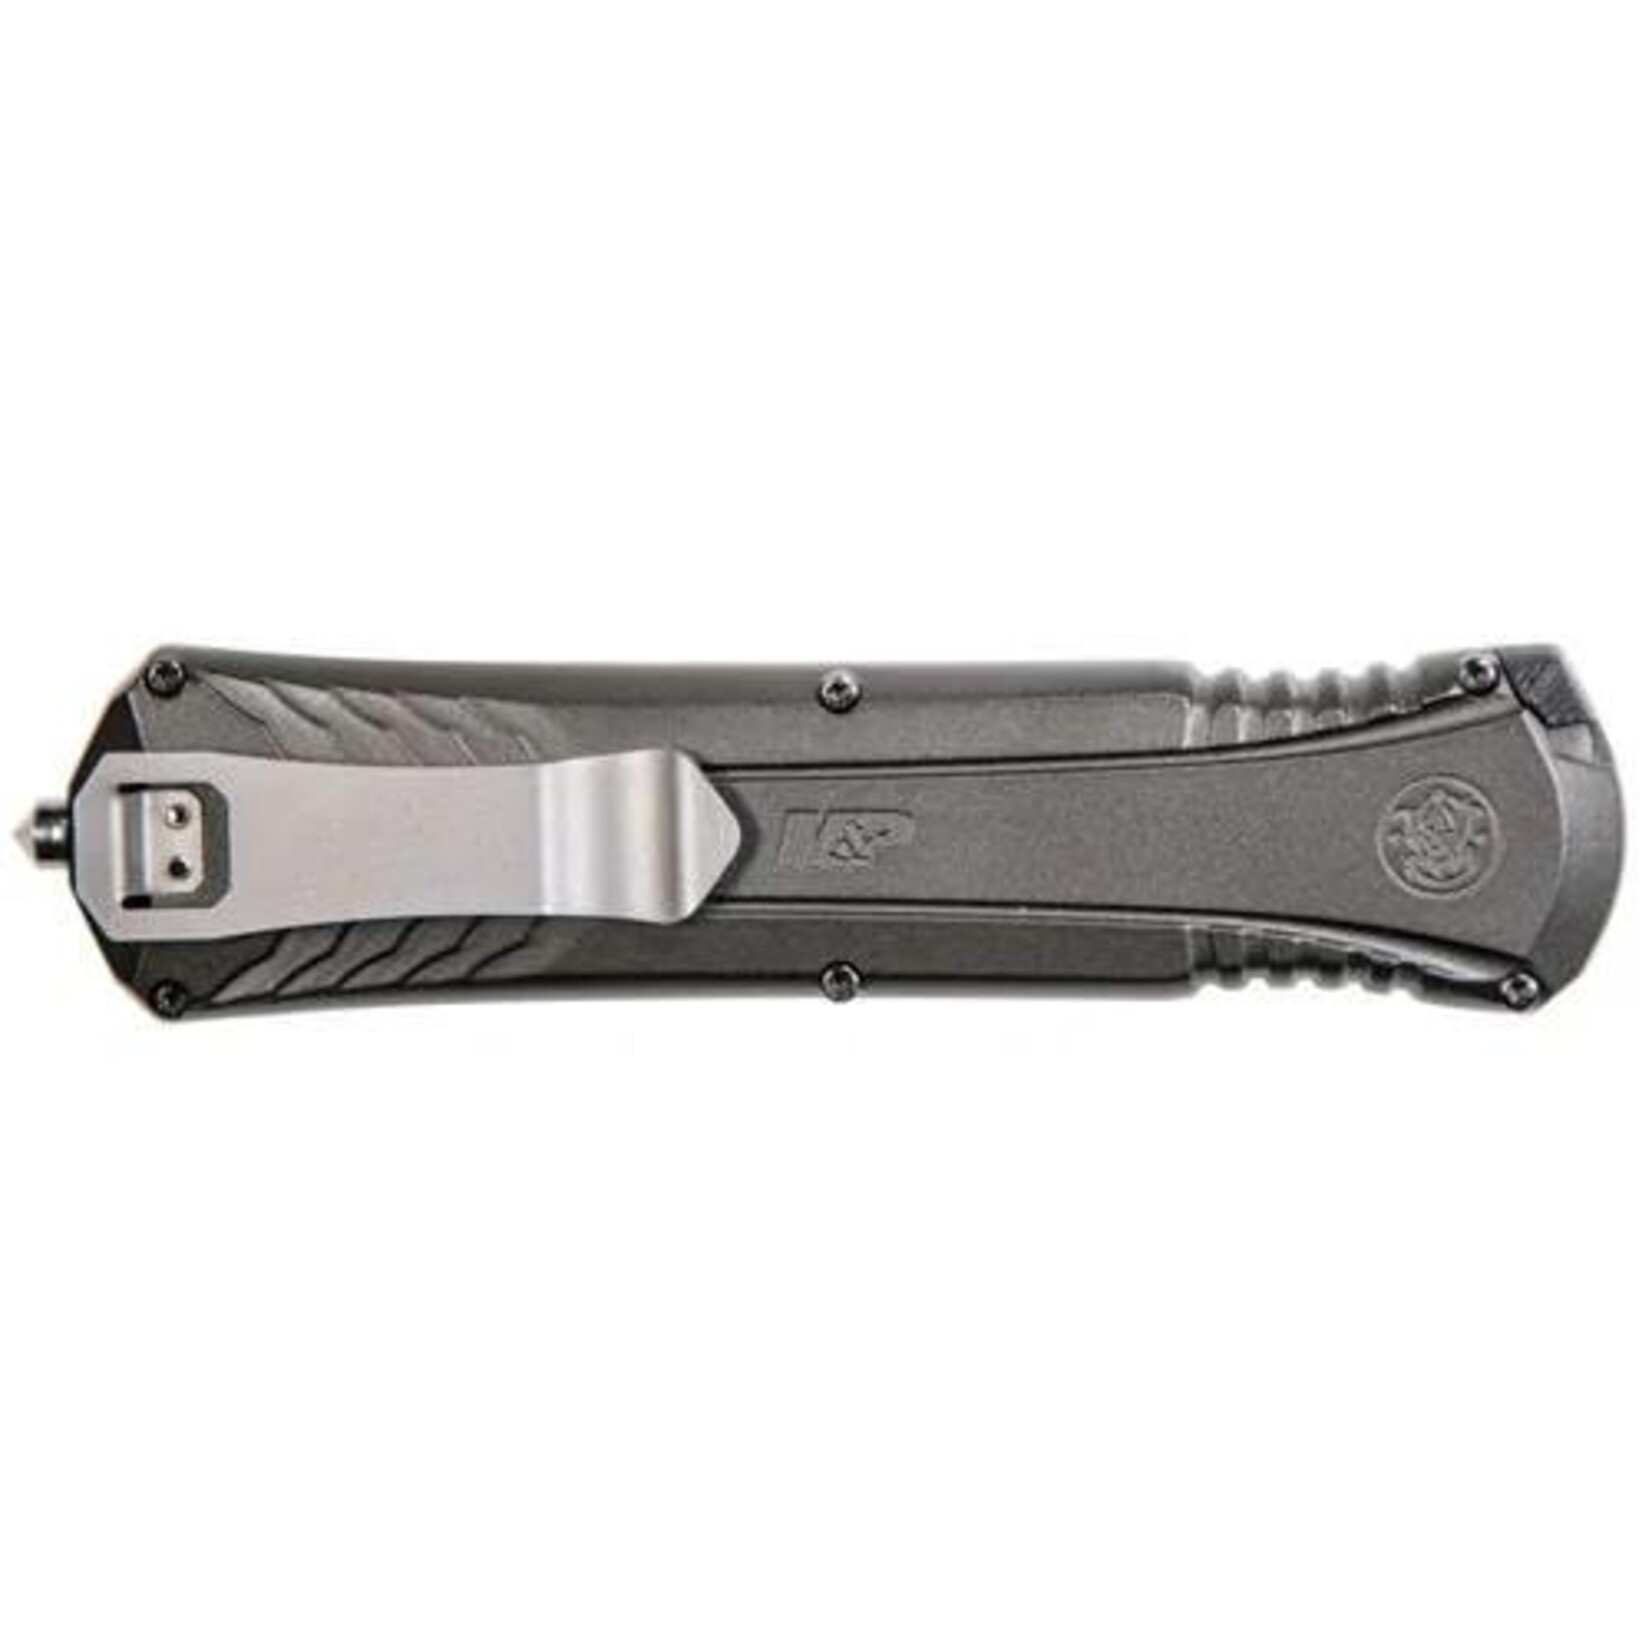 SMITH & WESSON SMITH AND WESSON M&P OTF KNIFE